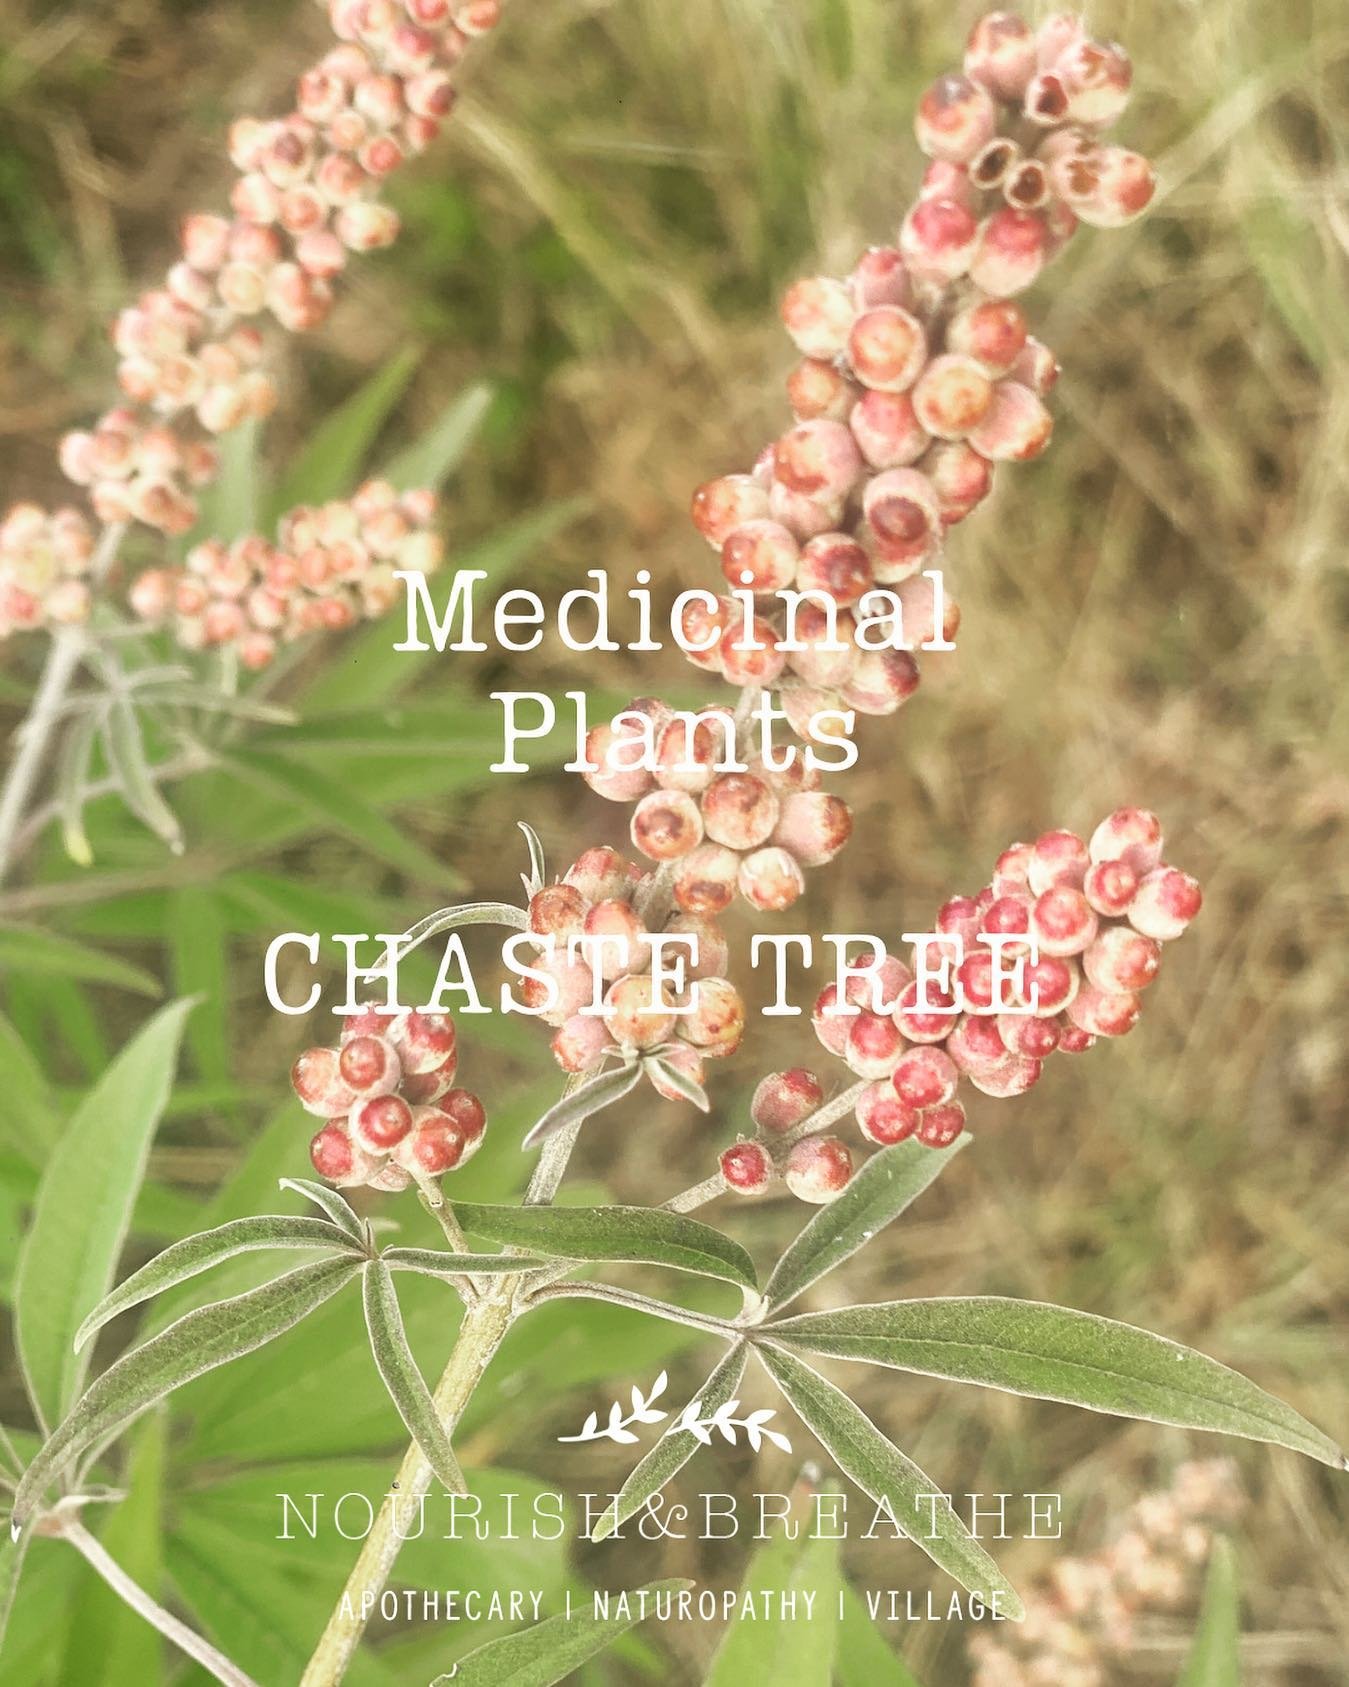 Chaste Tree is a well loved herbal medicine used by most naturopaths and herbalists when supporting women and their menstrual cycle. This herb is a powerhouse and some would consider indispensable in the dispensary when looking to help regulate the m